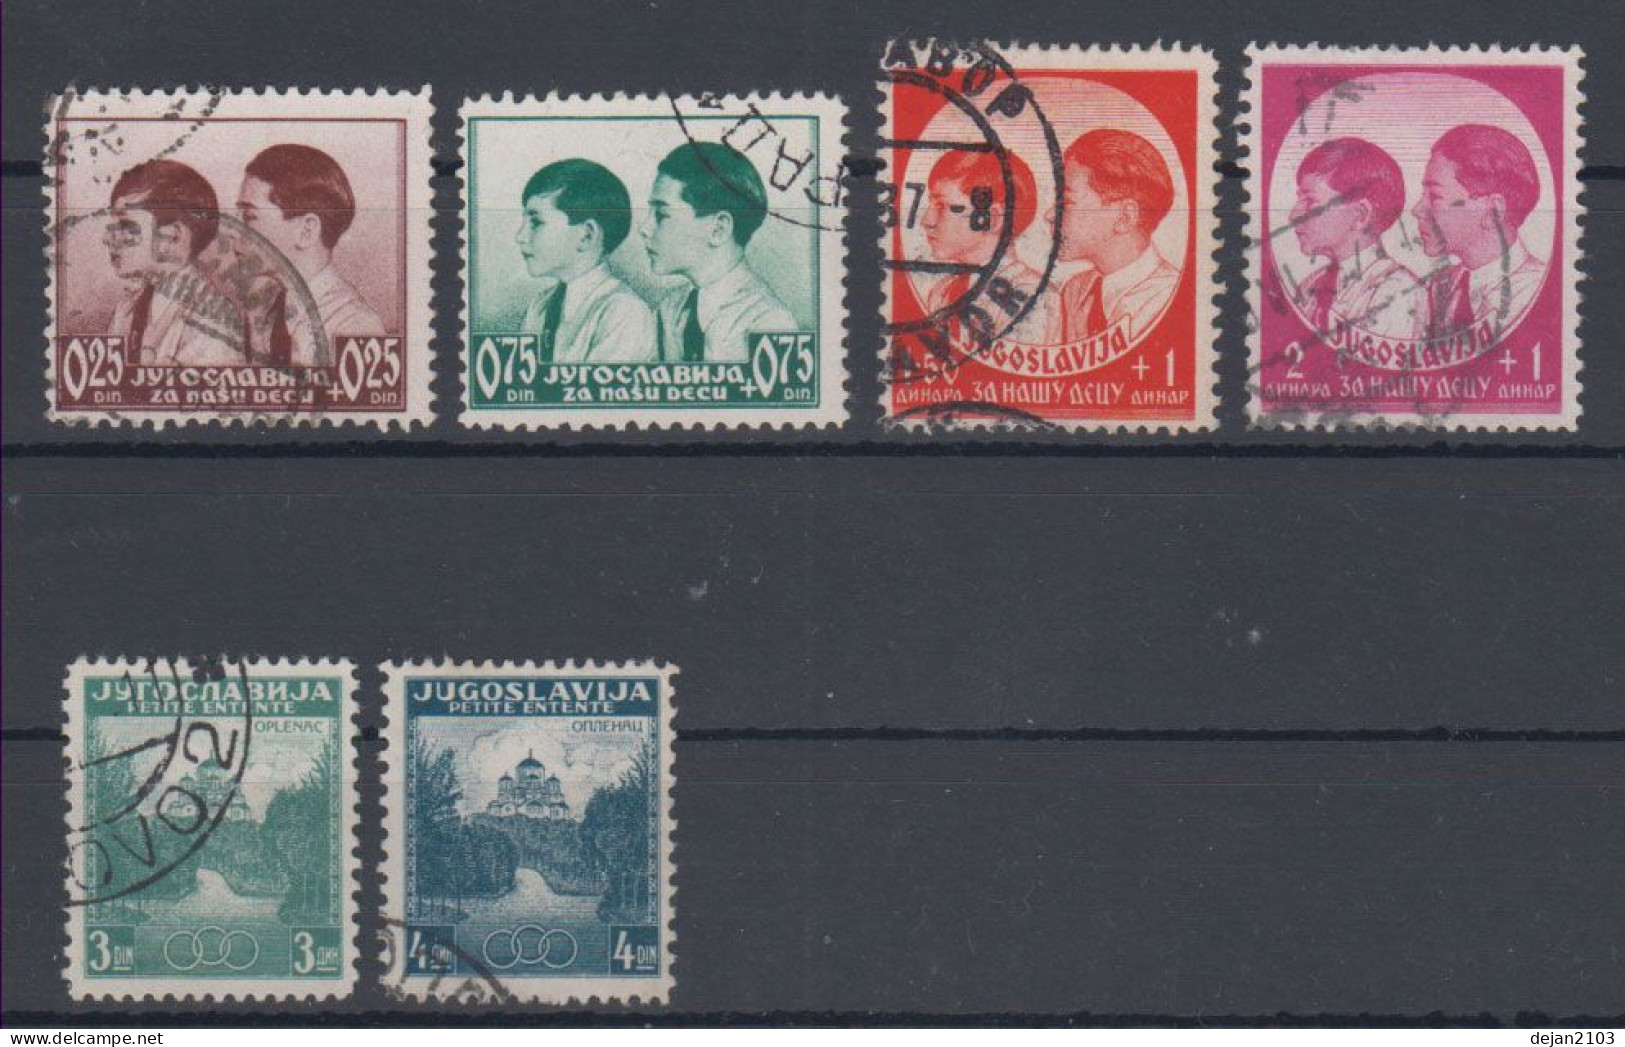 Yugoslavia Kingdom For Our Children,Oplenac 1937 USED - Used Stamps